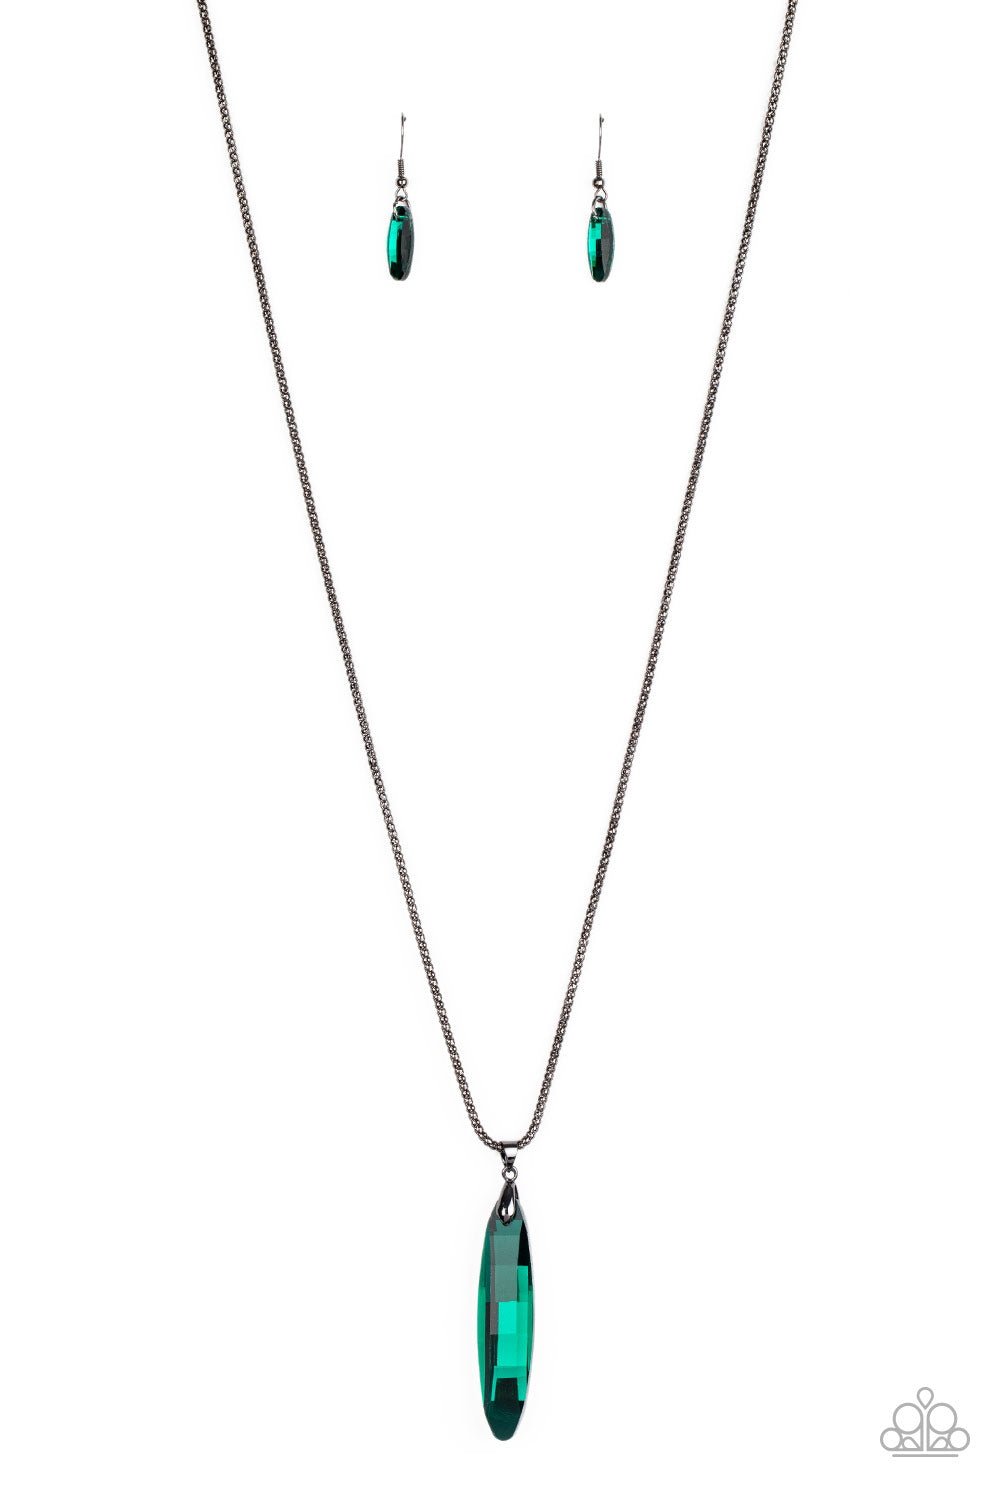 Meteor Shower Green Necklace - Paparazzi Accessories